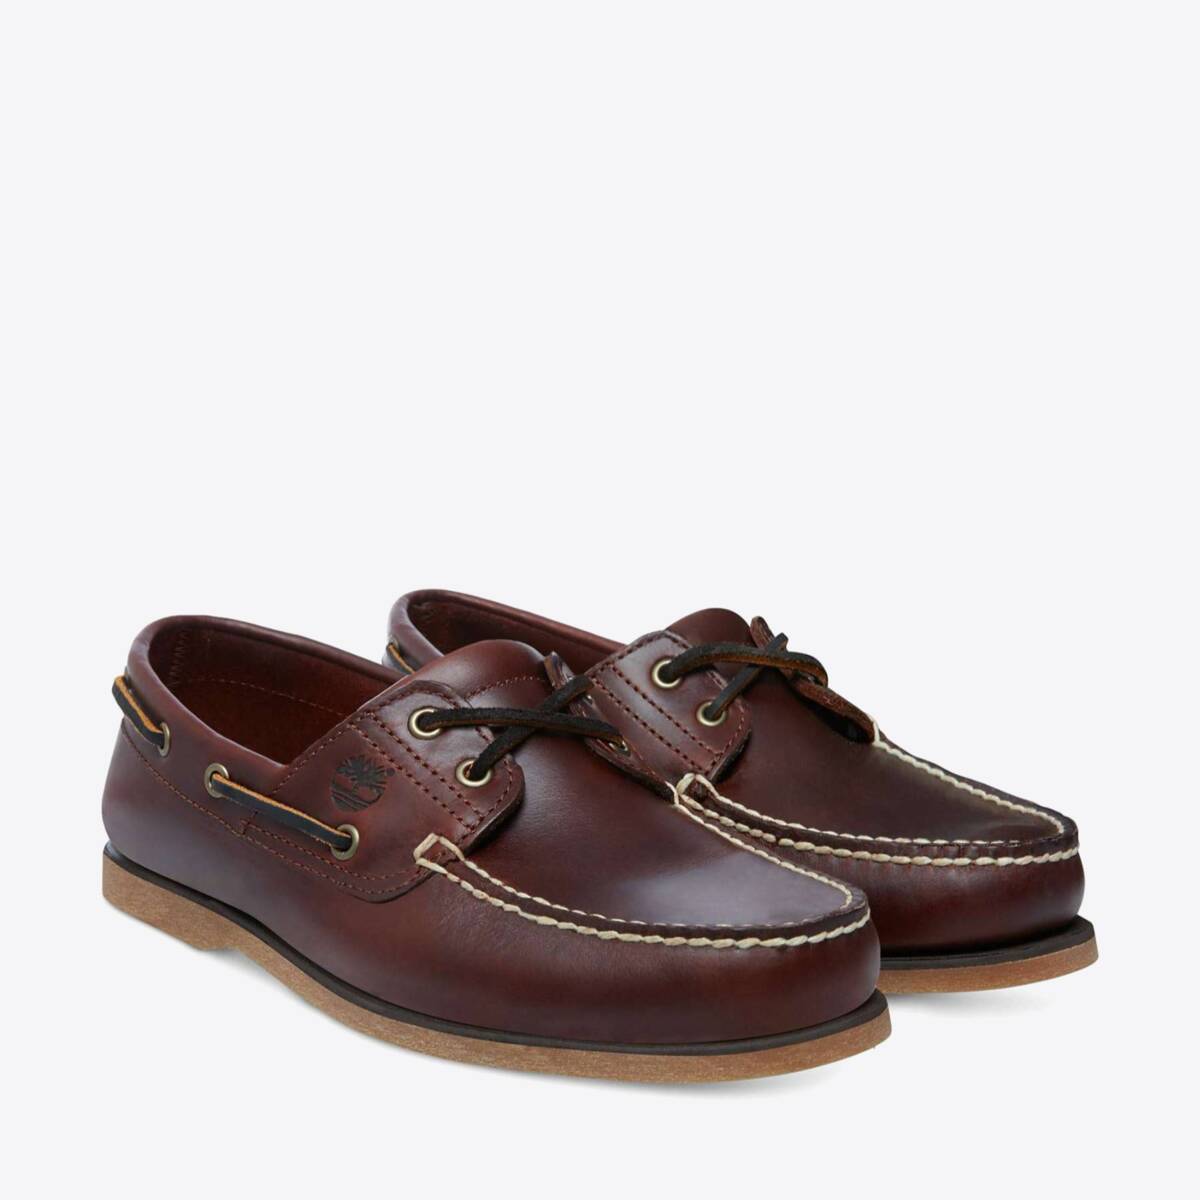 TIMBERLAND Classic 2-Eye Boat Shoes Rootbeer - Image 4